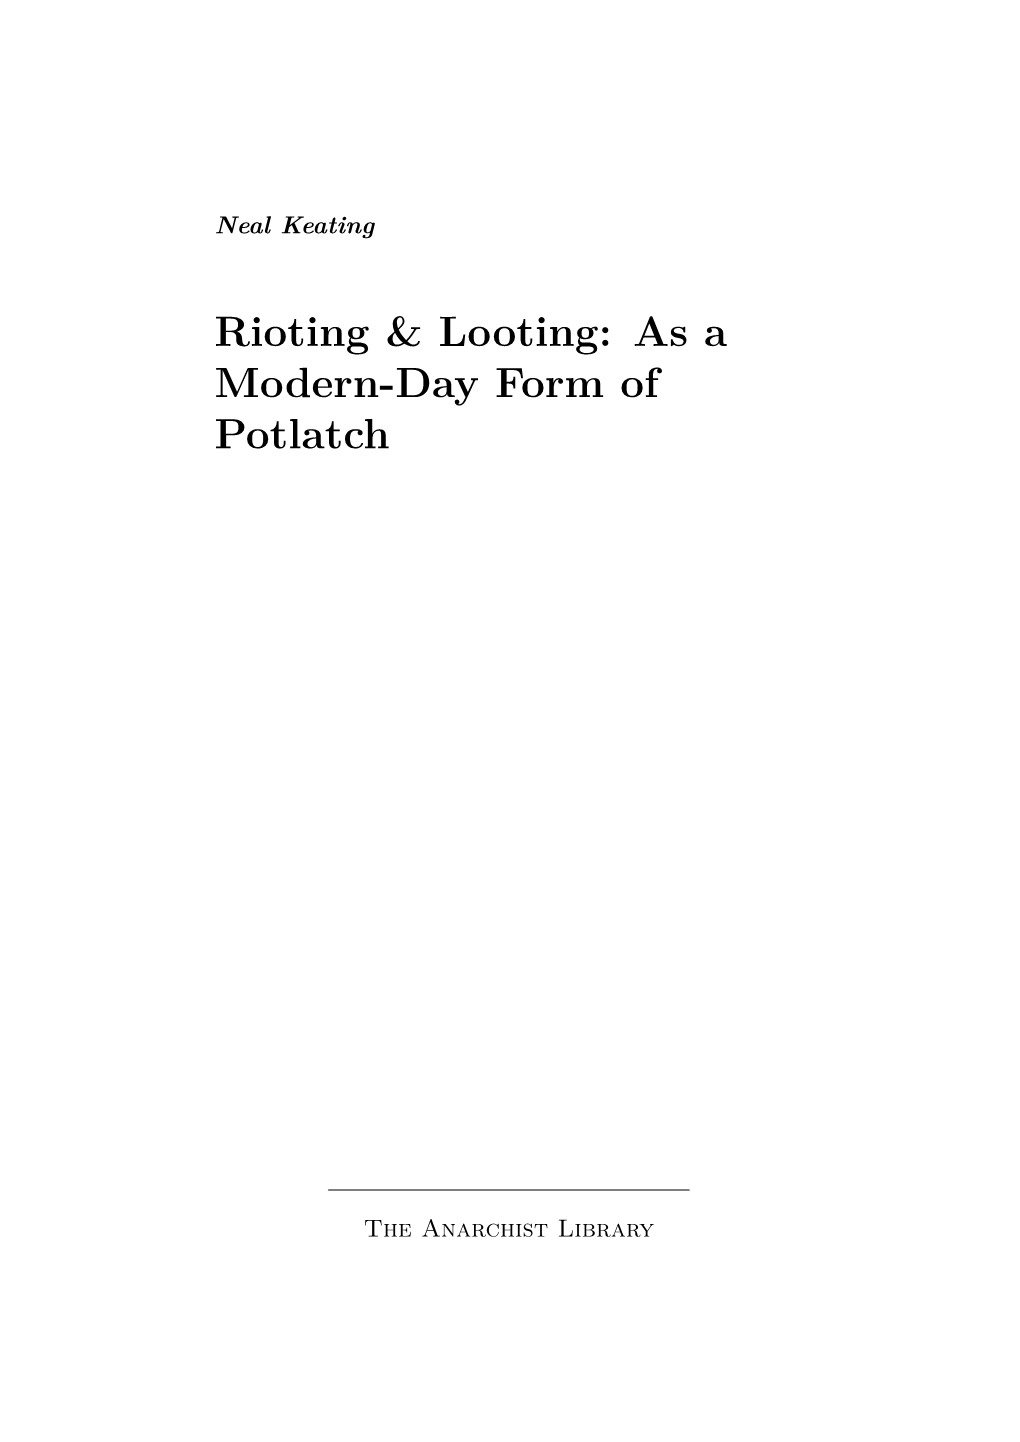 Rioting & Looting: As a Modern-Day Form of Potlatch